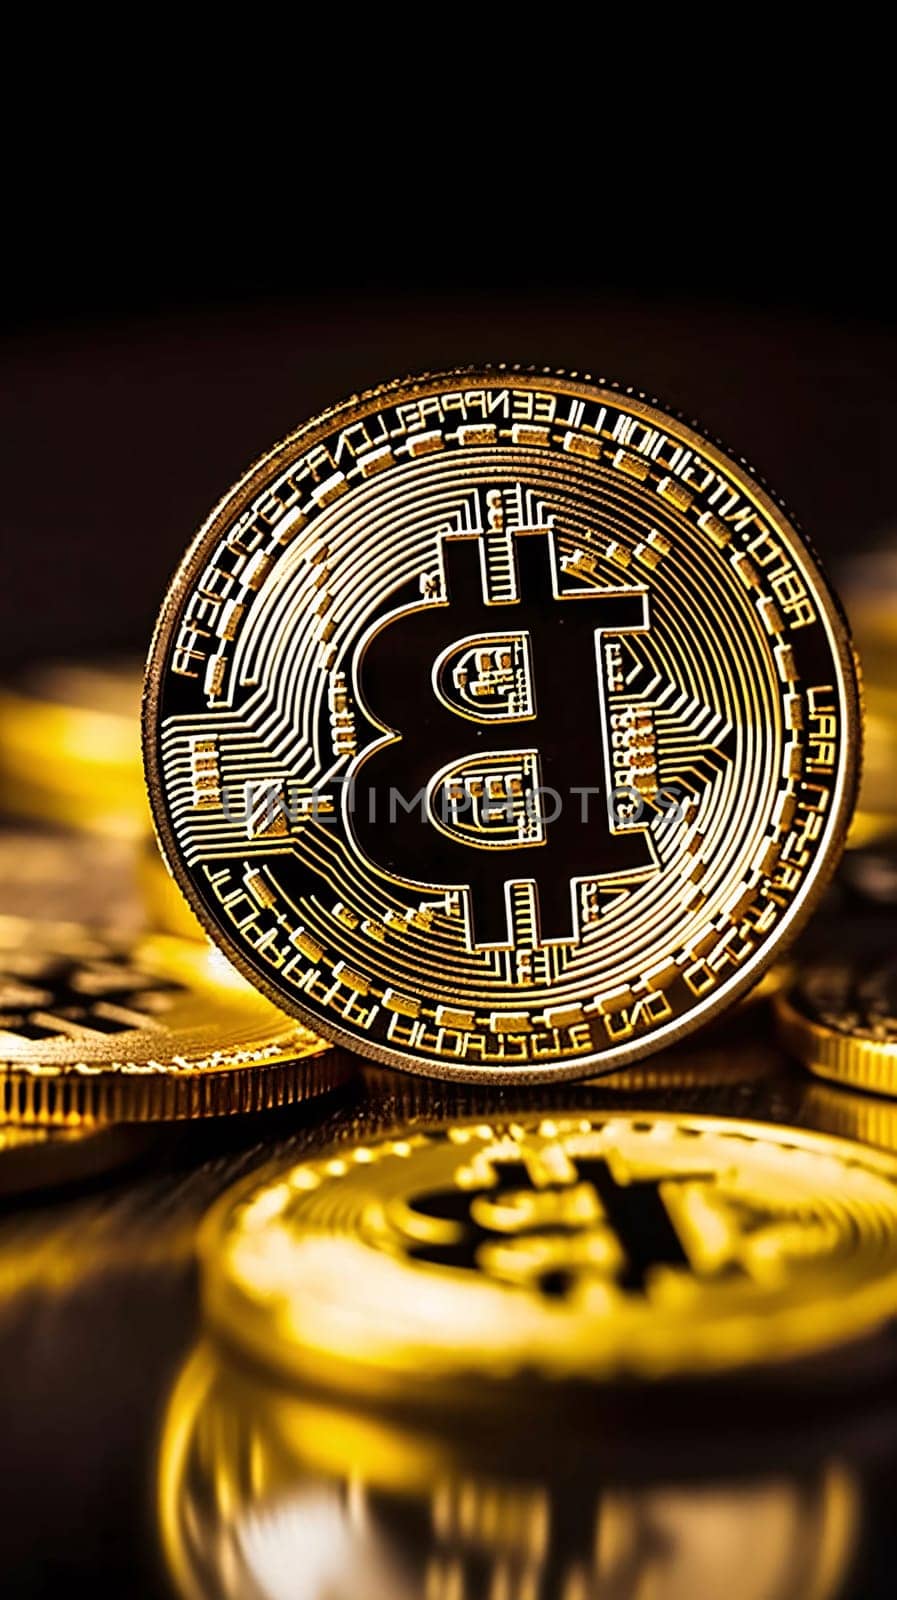 Stock Market: Bitcoin is a modern way of exchange and this crypto currency is a convenient means of payment in the financial